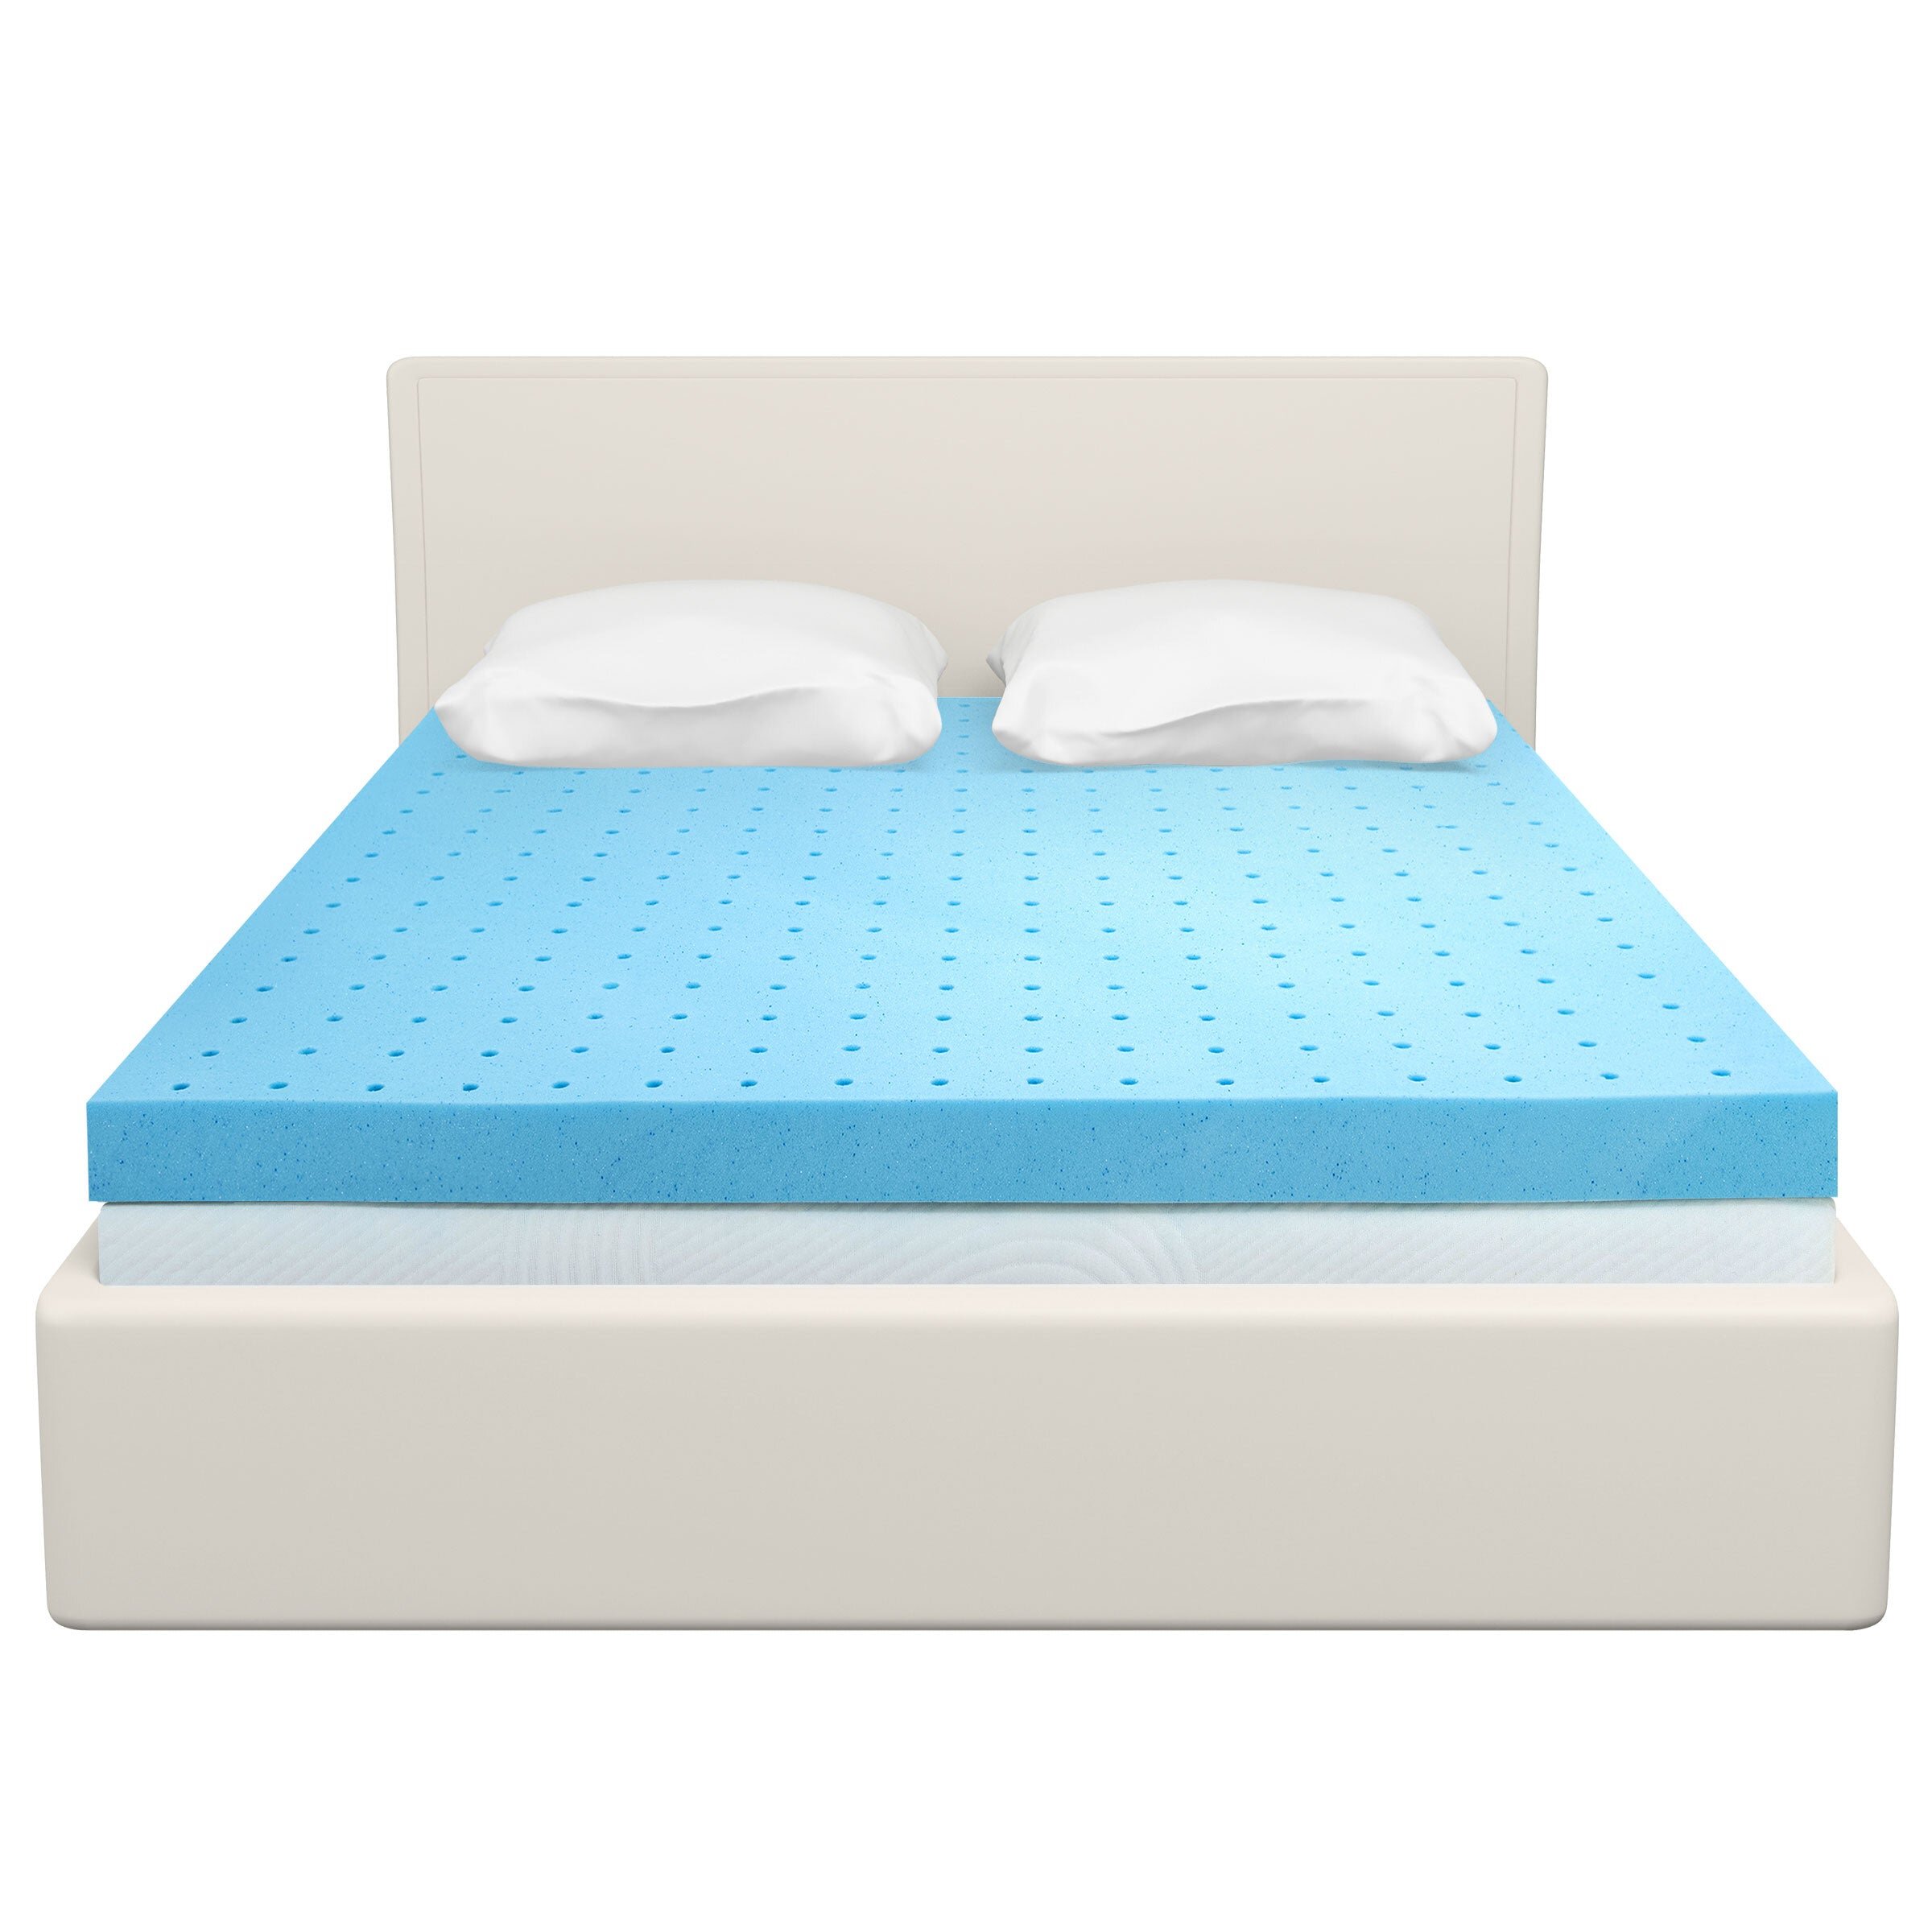 Subrtex 4 Inch Removable Cooling Mattress Topper Cover (Only Cover